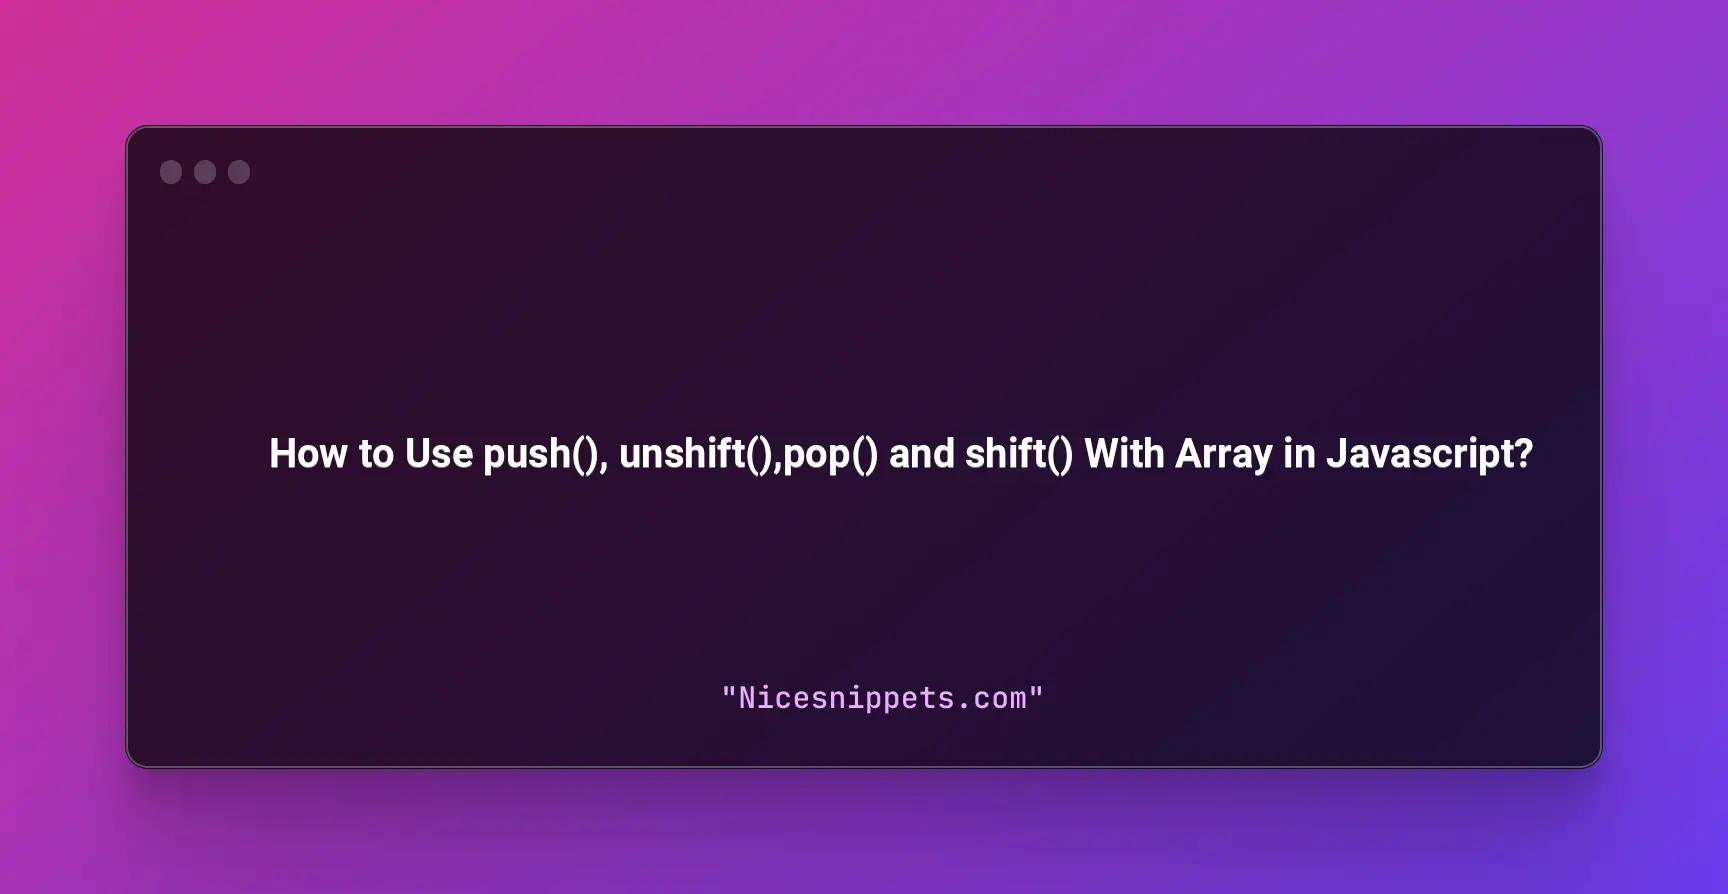 How to Use push(), unshift(),pop() and shift() With Array in Javascript?